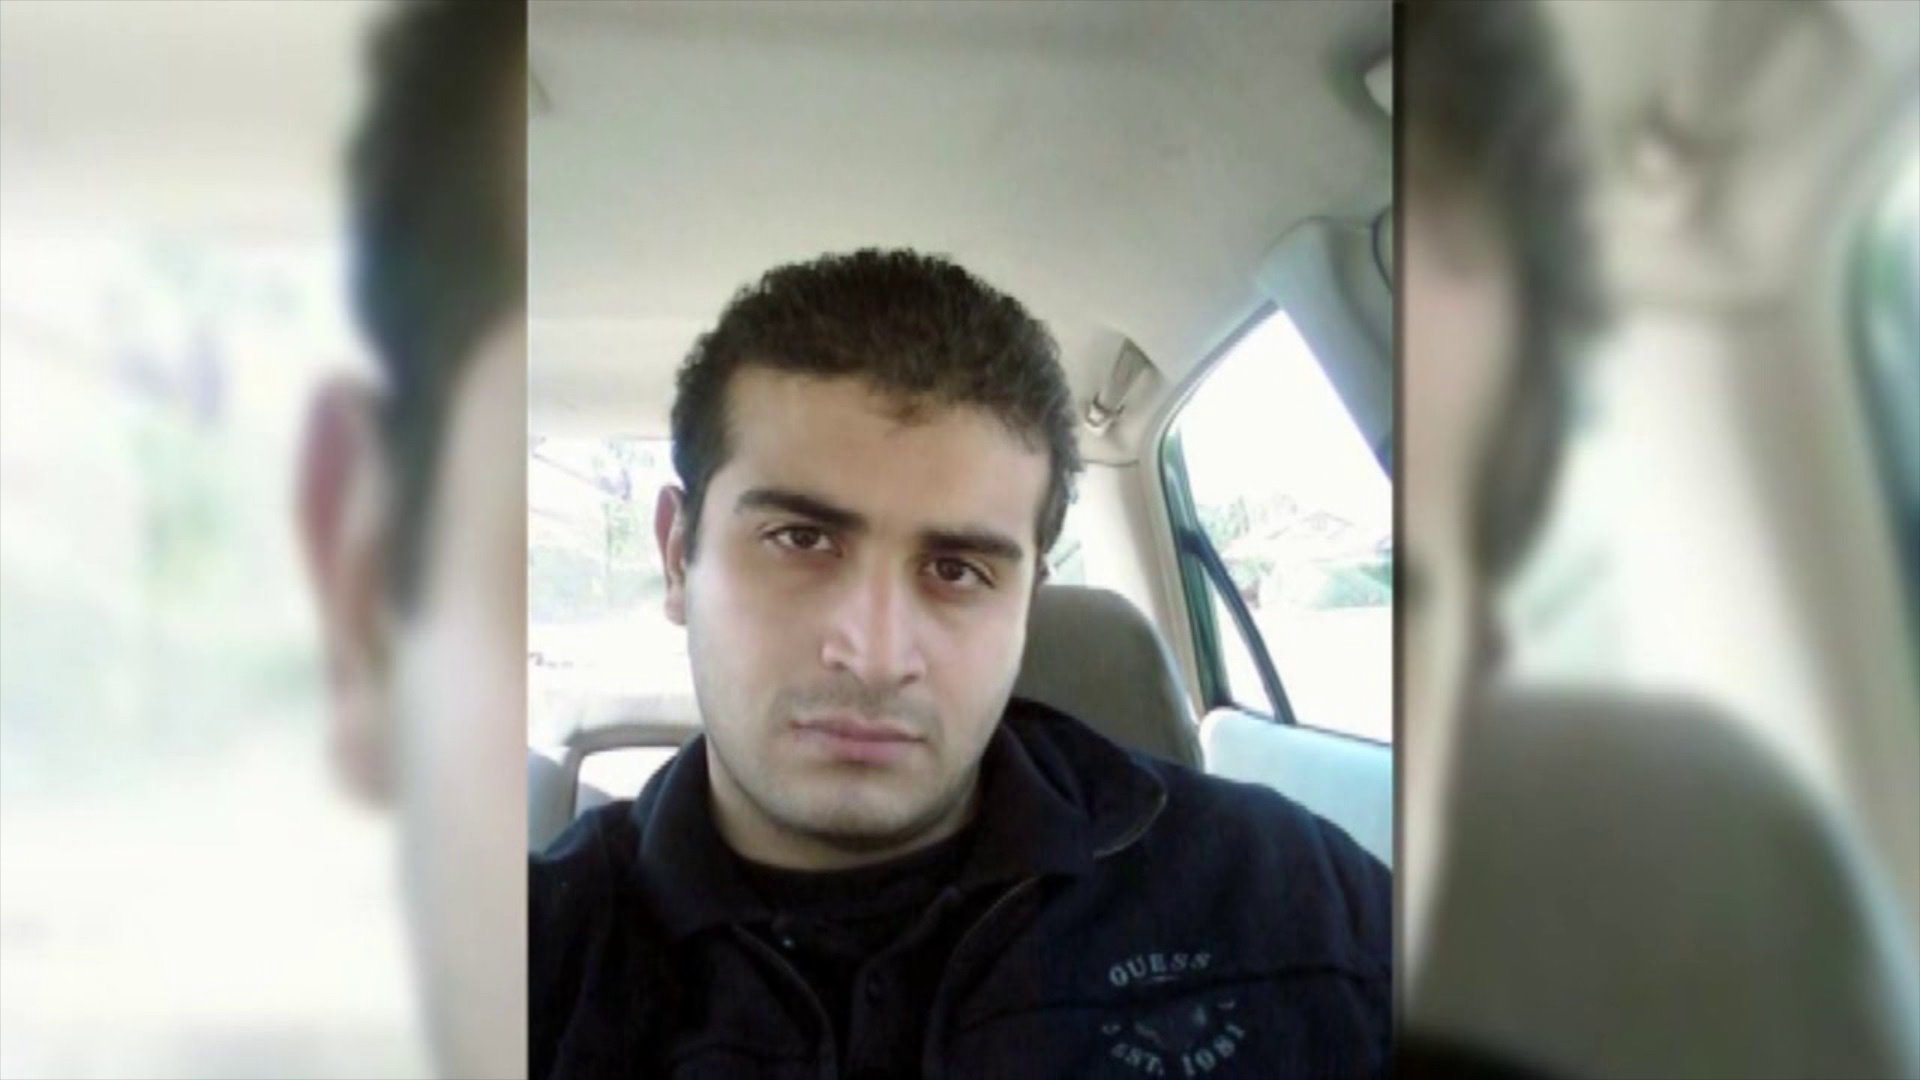 Omar Saddiqui Mateen was the gunman who opened fire at a gay nightclub in Orlando, Florida killing at least 49 people